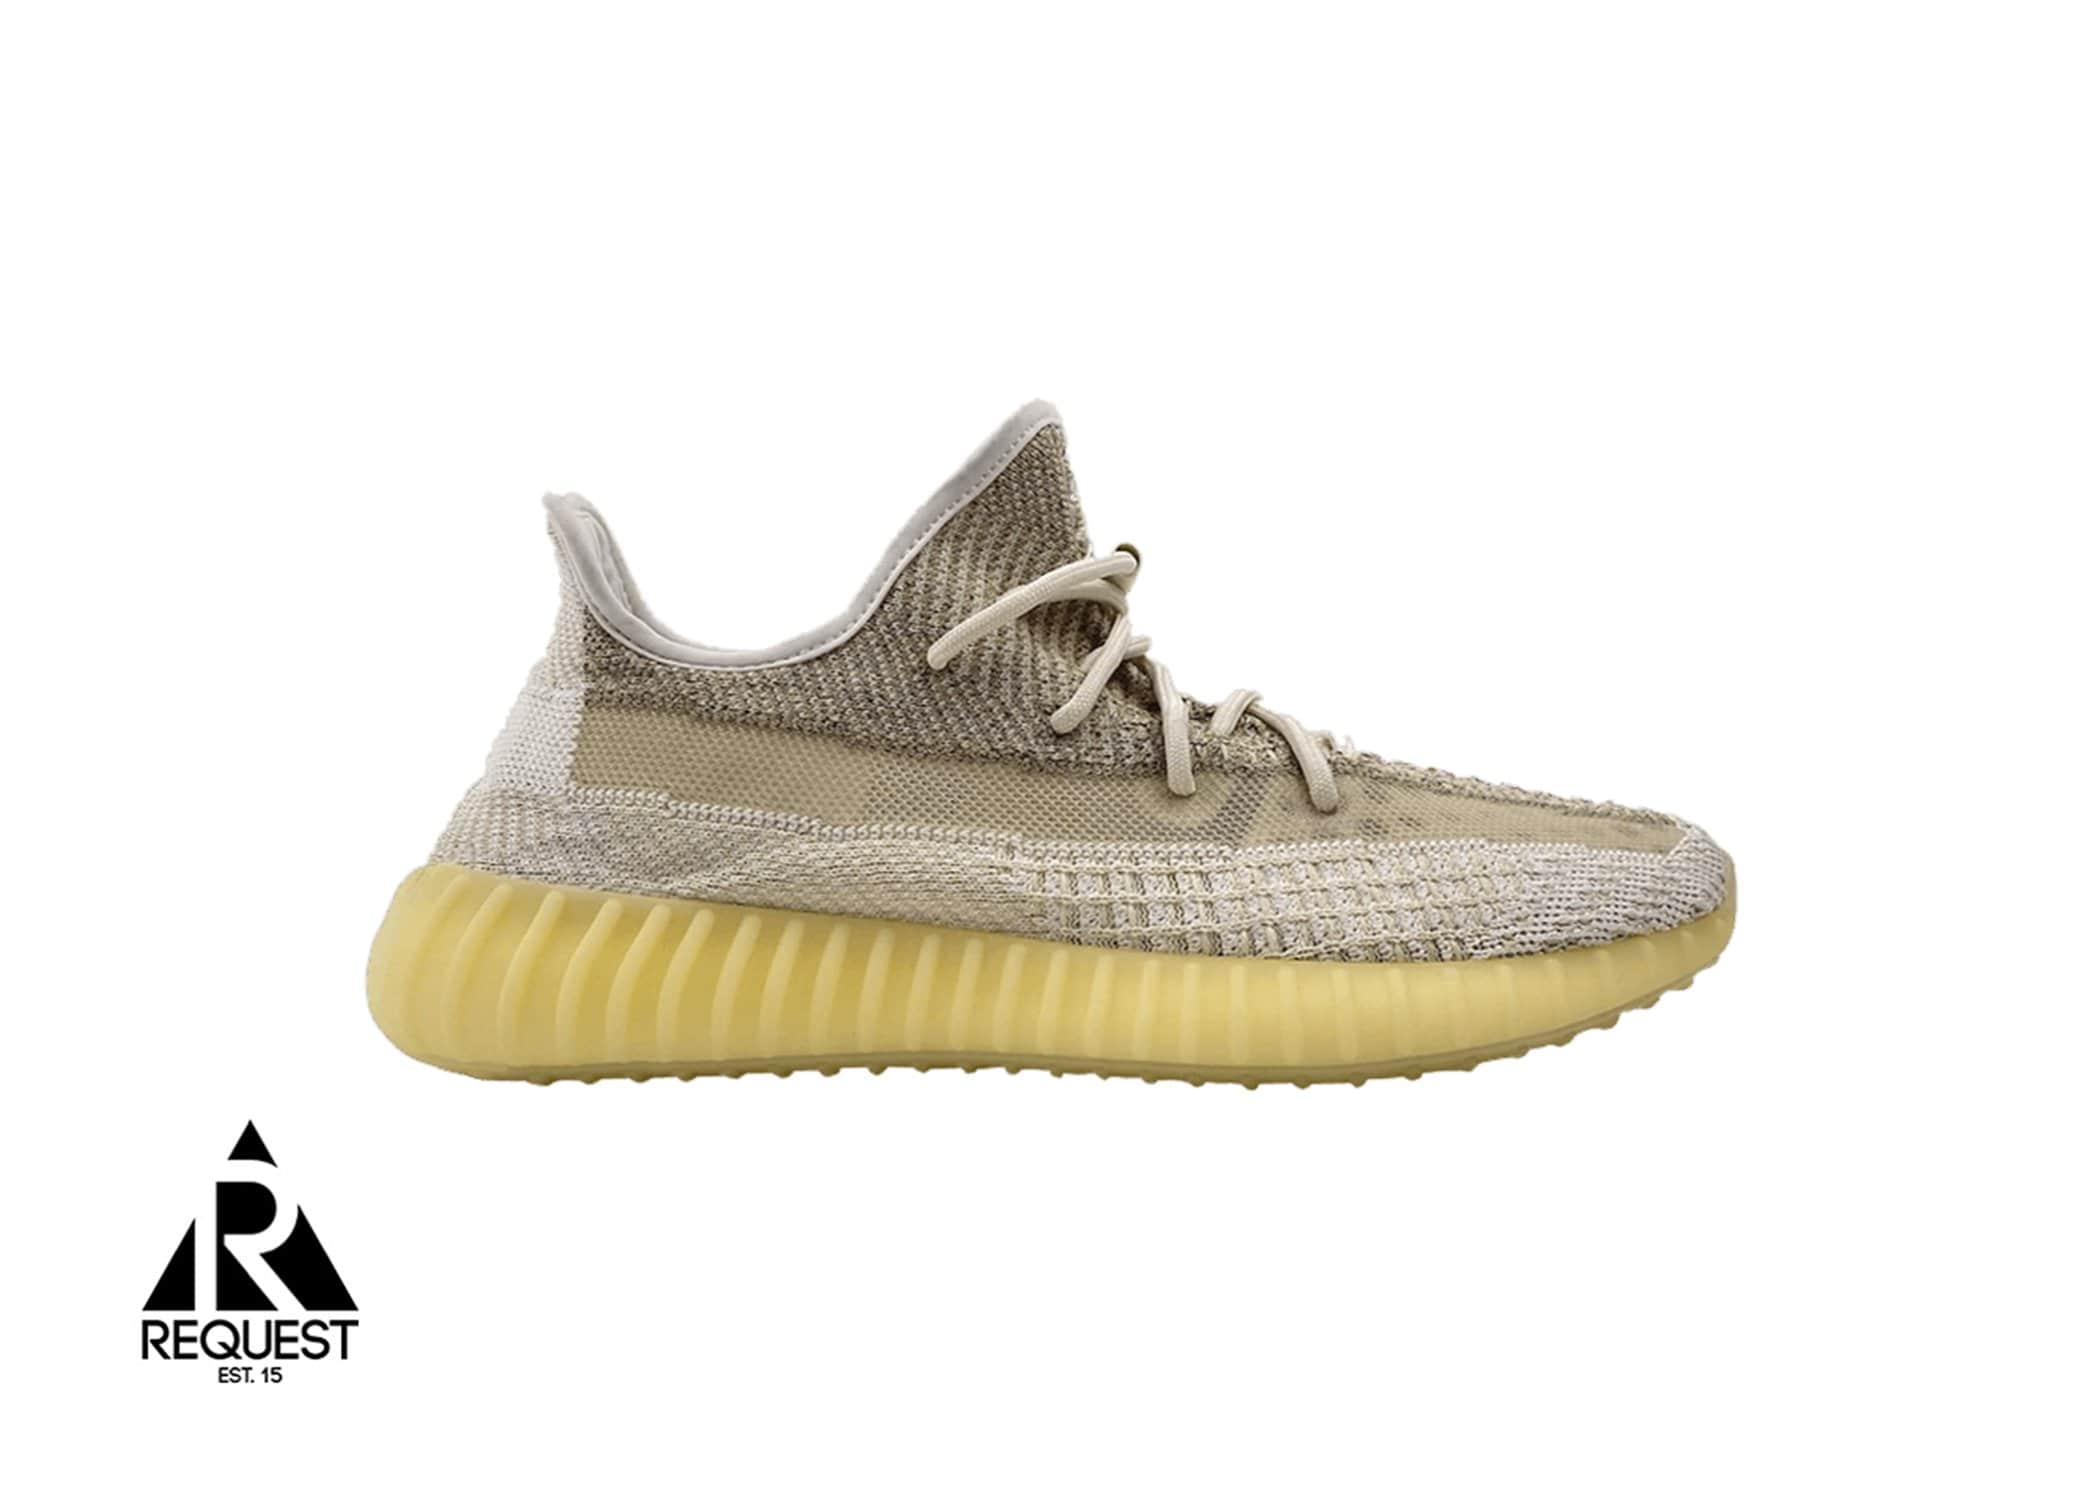 Adidas Yeezy Boost 350 V2 “Natural”